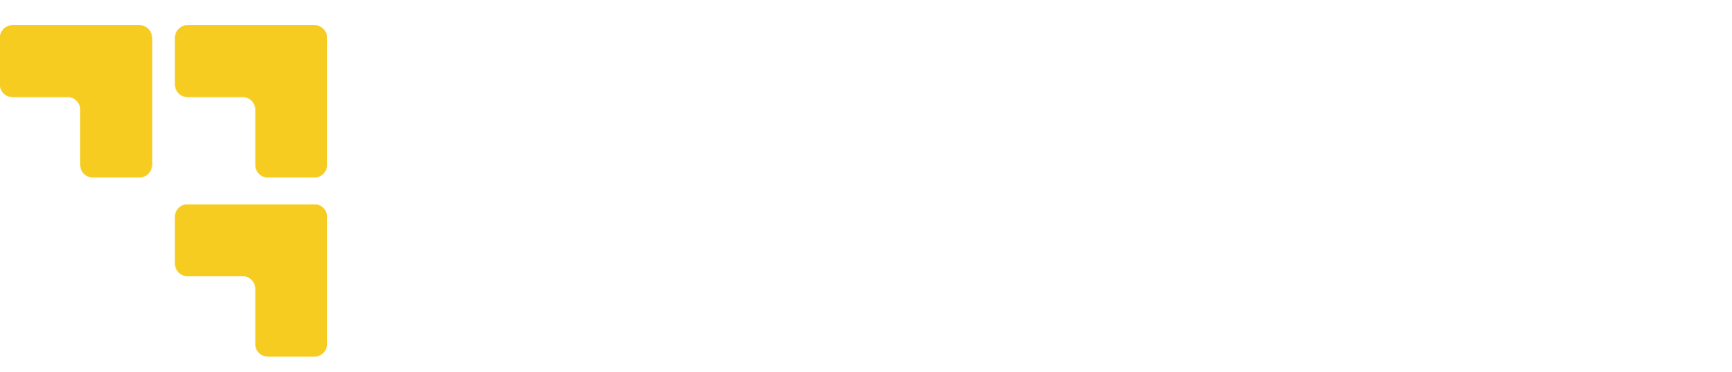 Go to Mission Driven Finance page